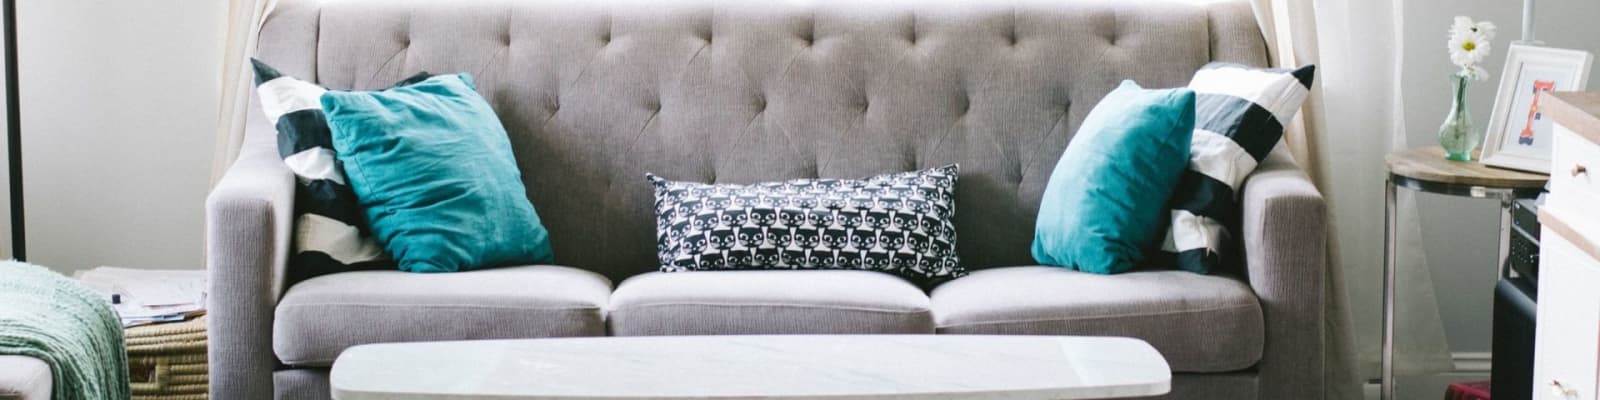 upholstery cleaning pros in Umhlanga